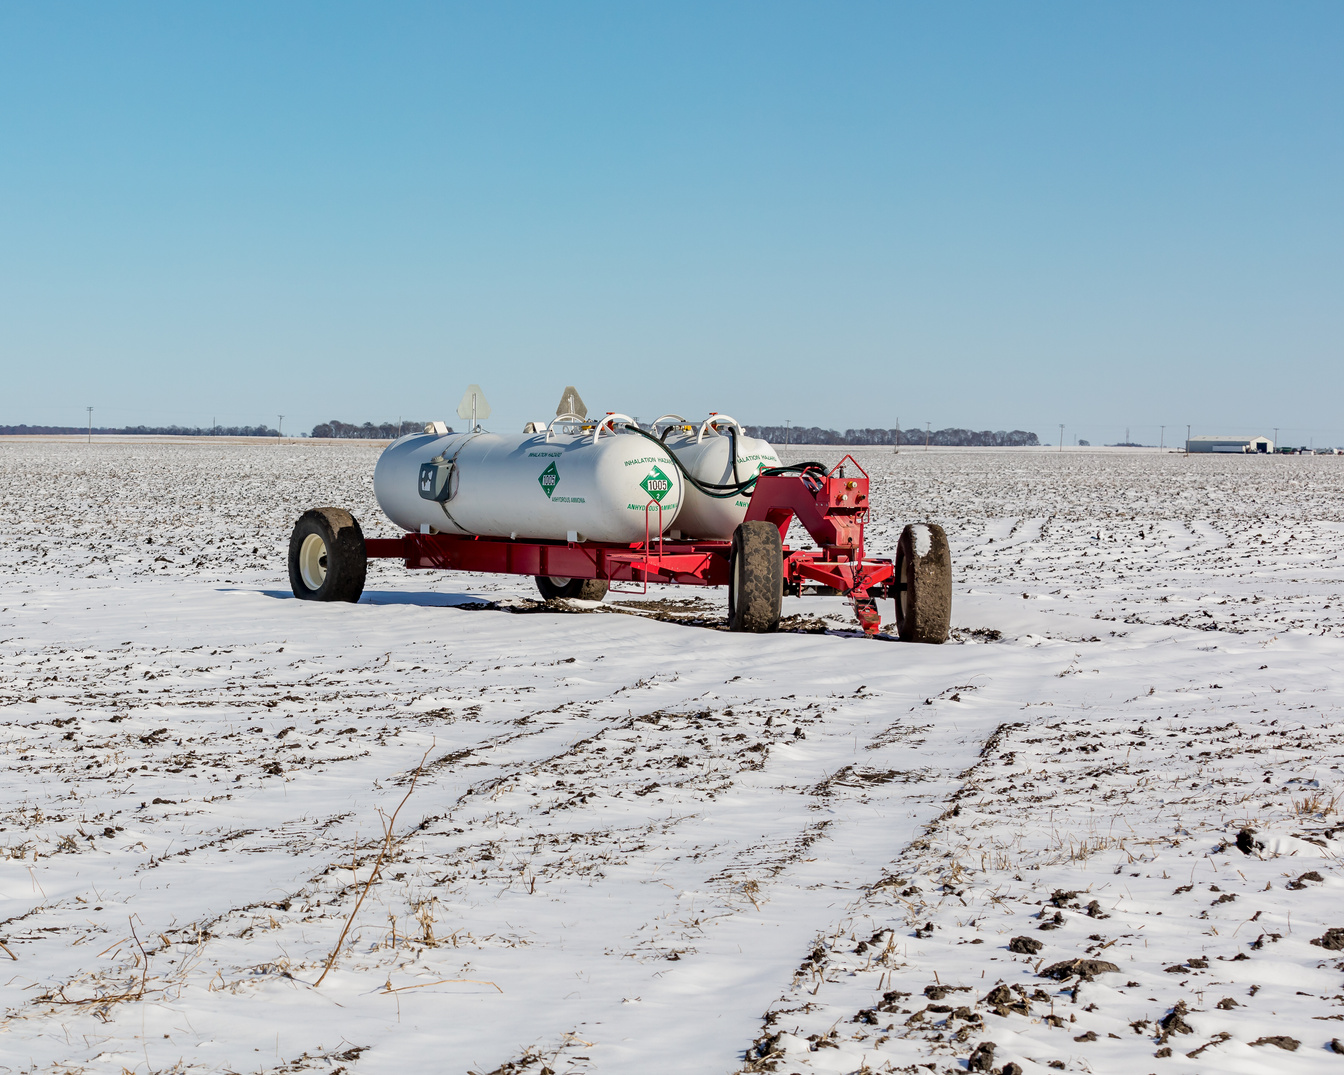 Anhydrous ammonia fertilizer tanks and wagon in harvested soybean farm field covered in snow after an eary winter snowstorm